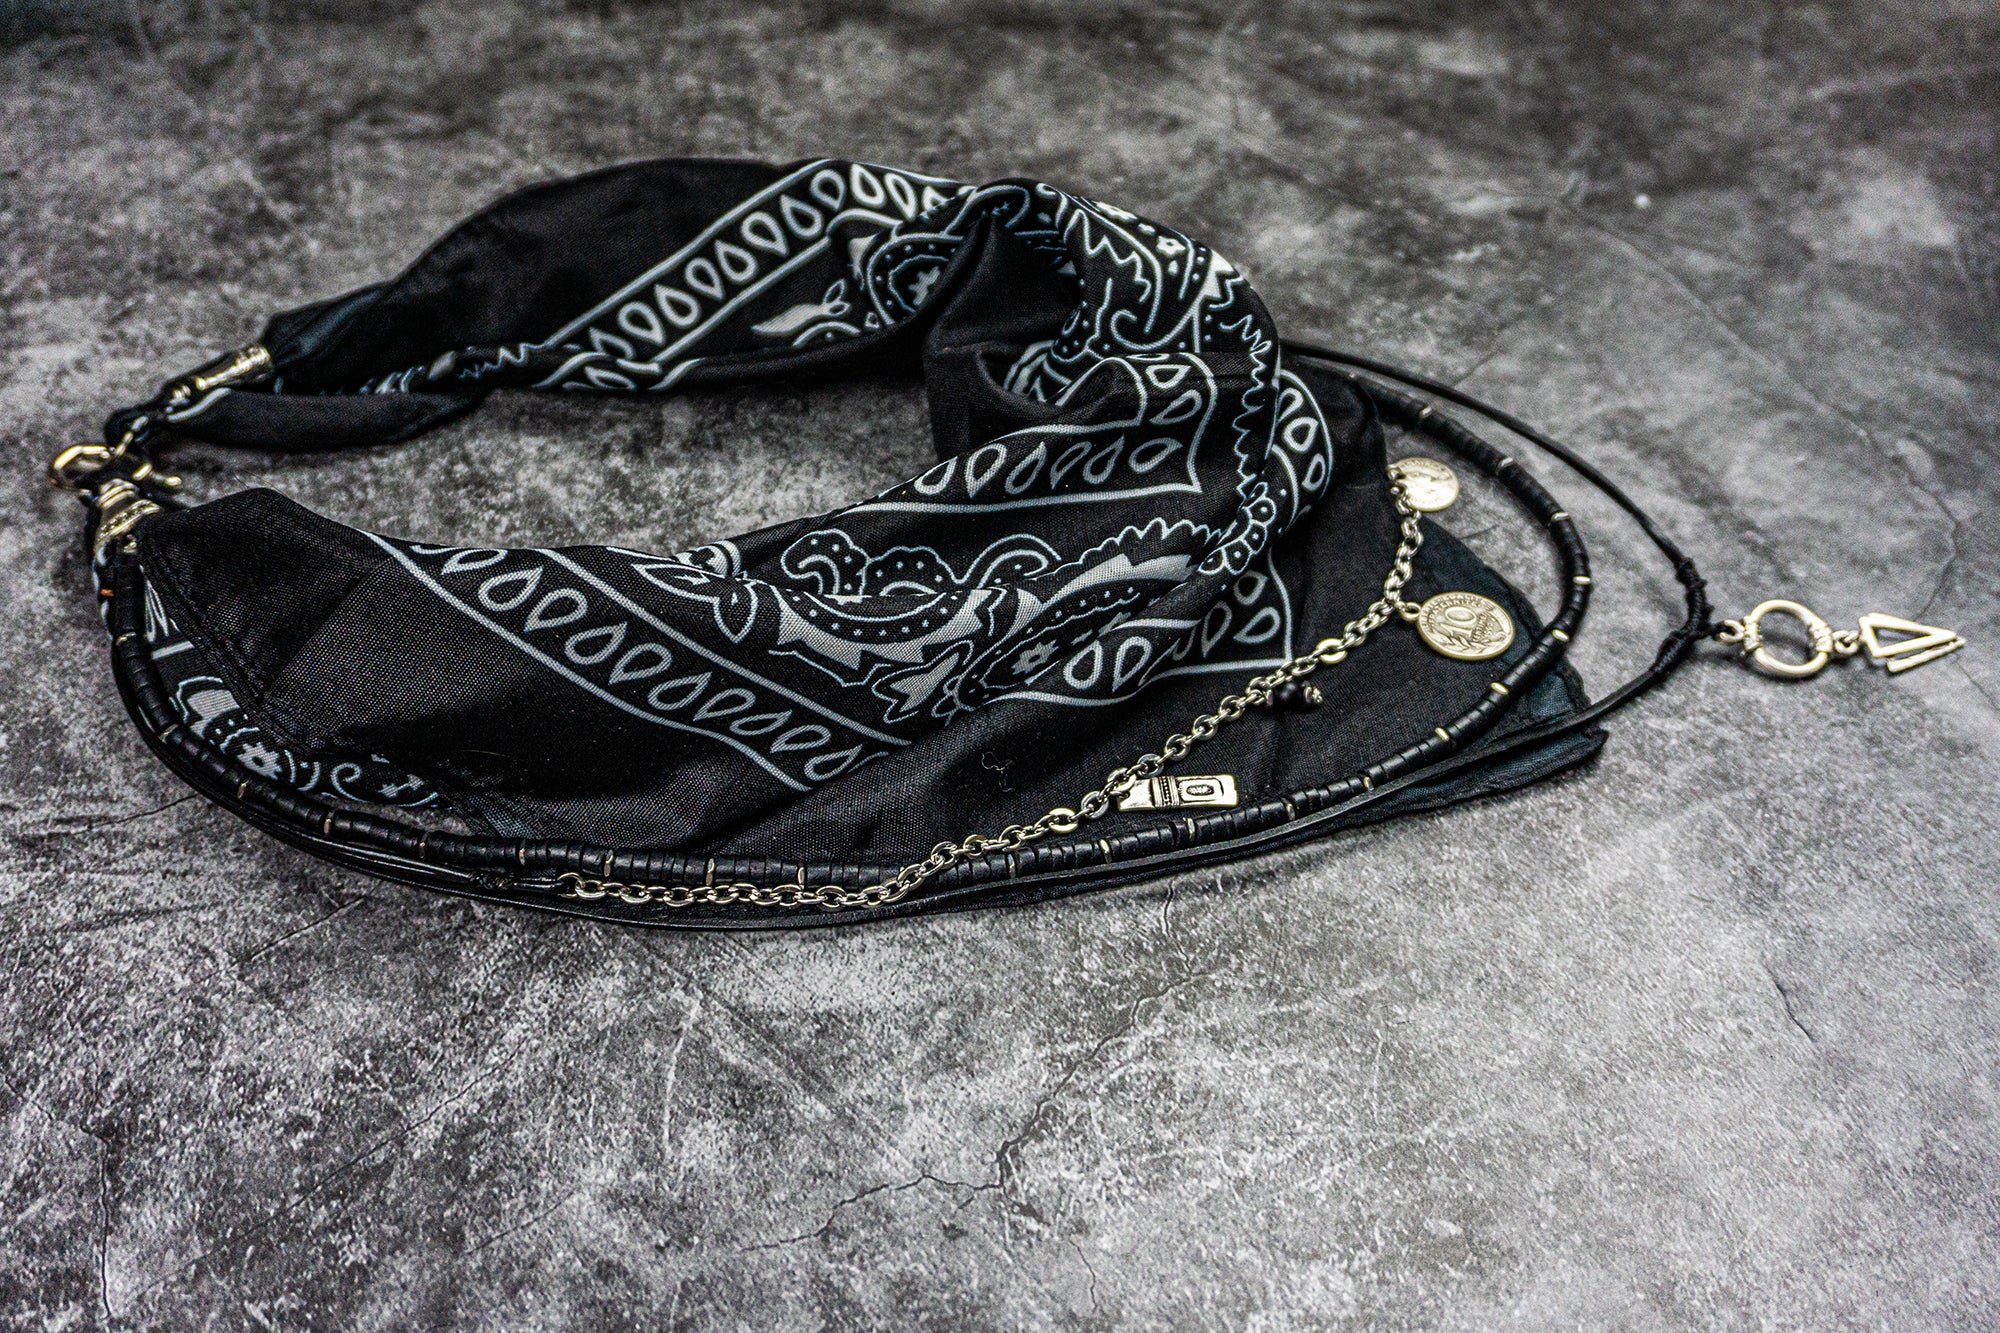 black bandana layered necklace made of stainless steel chain strand with charms, , lblack leather strand with arrowed pendant and black coconut strand